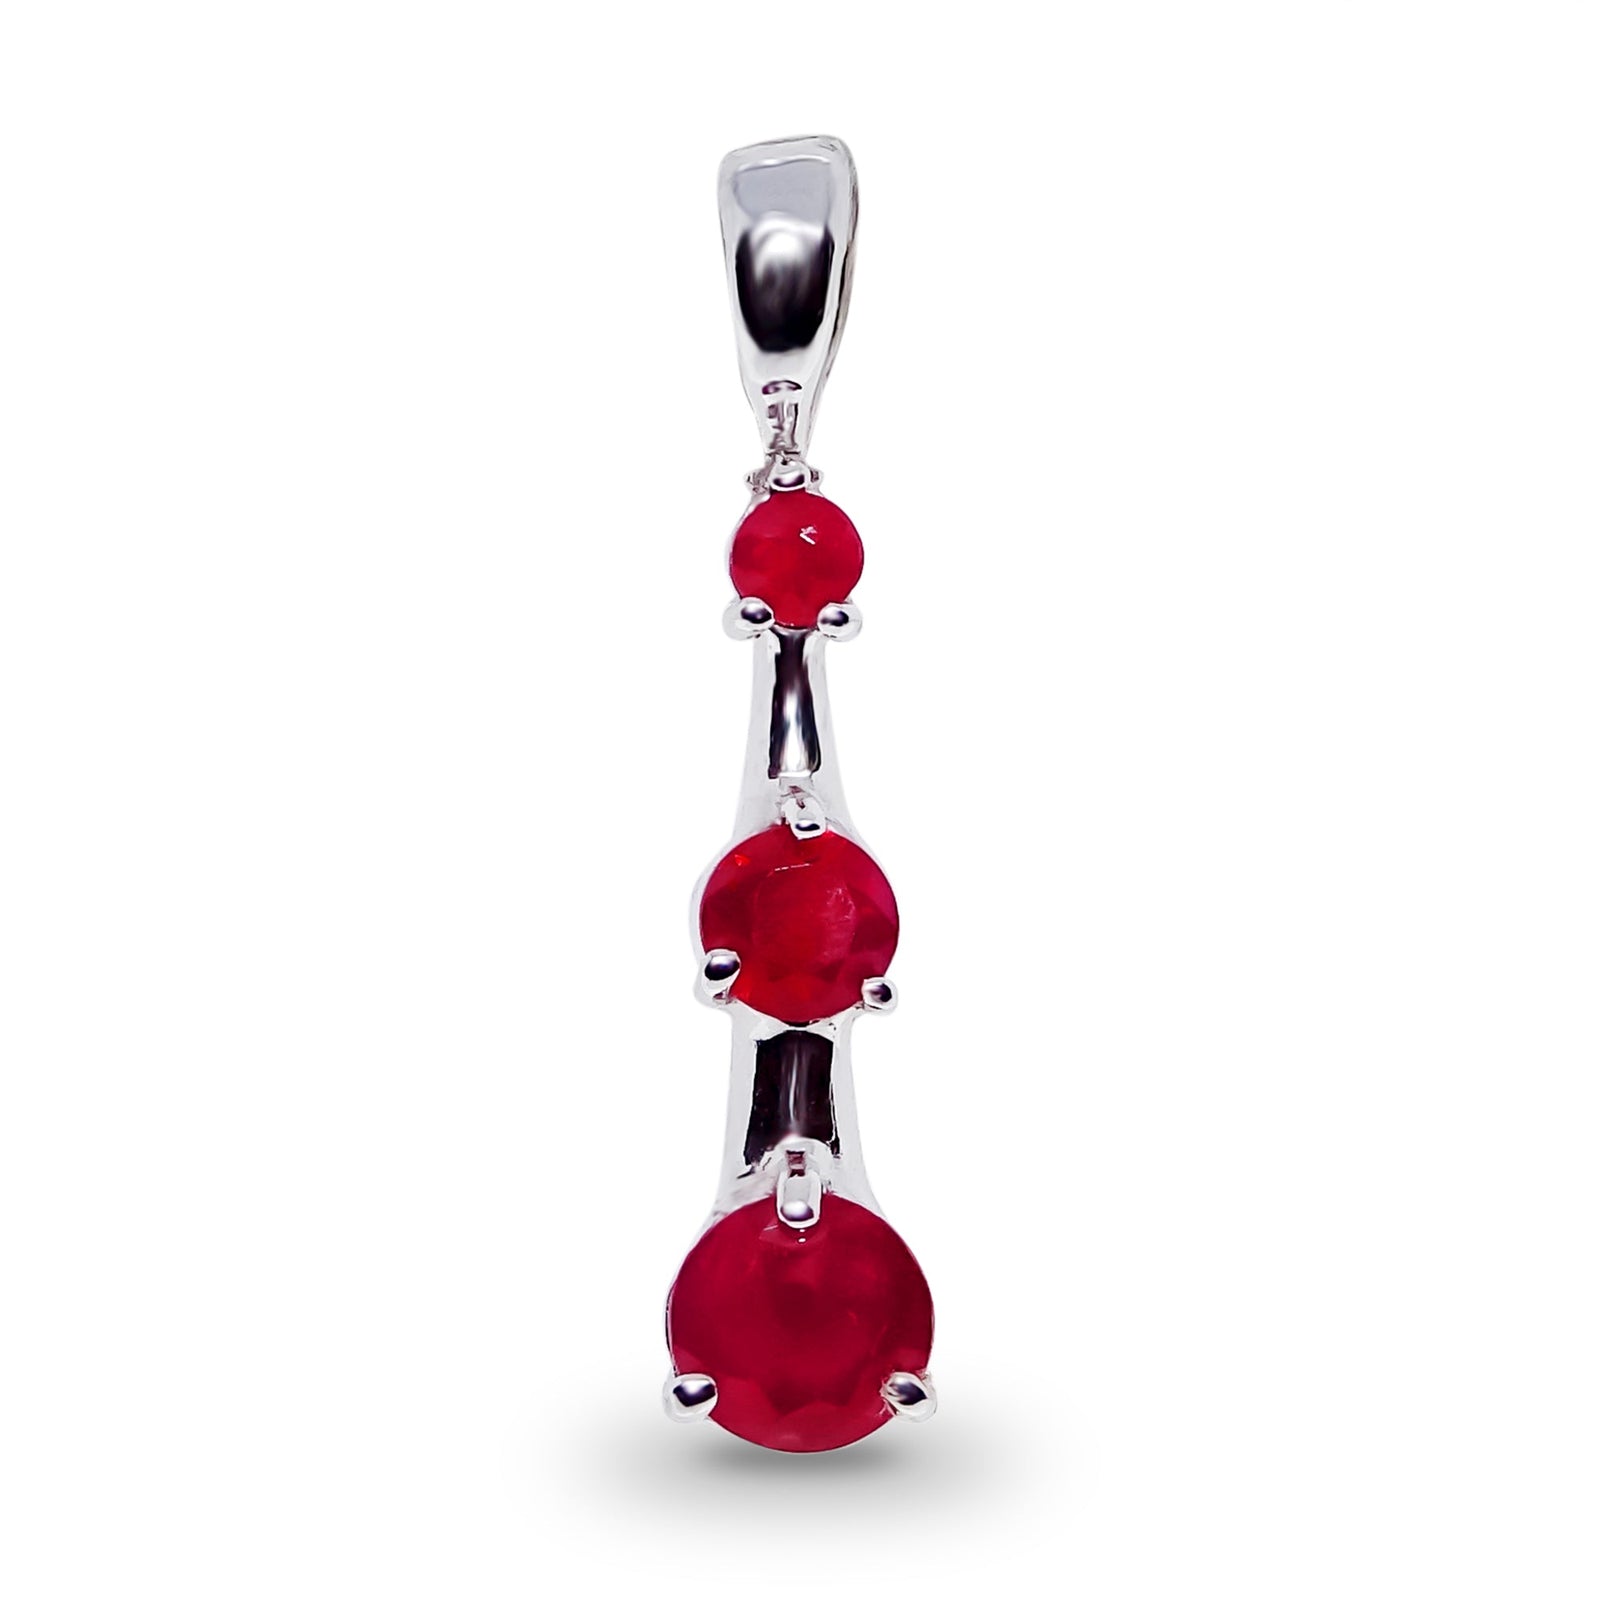 9ct white gold triple round ruby (2,3 & 4mm) pendant